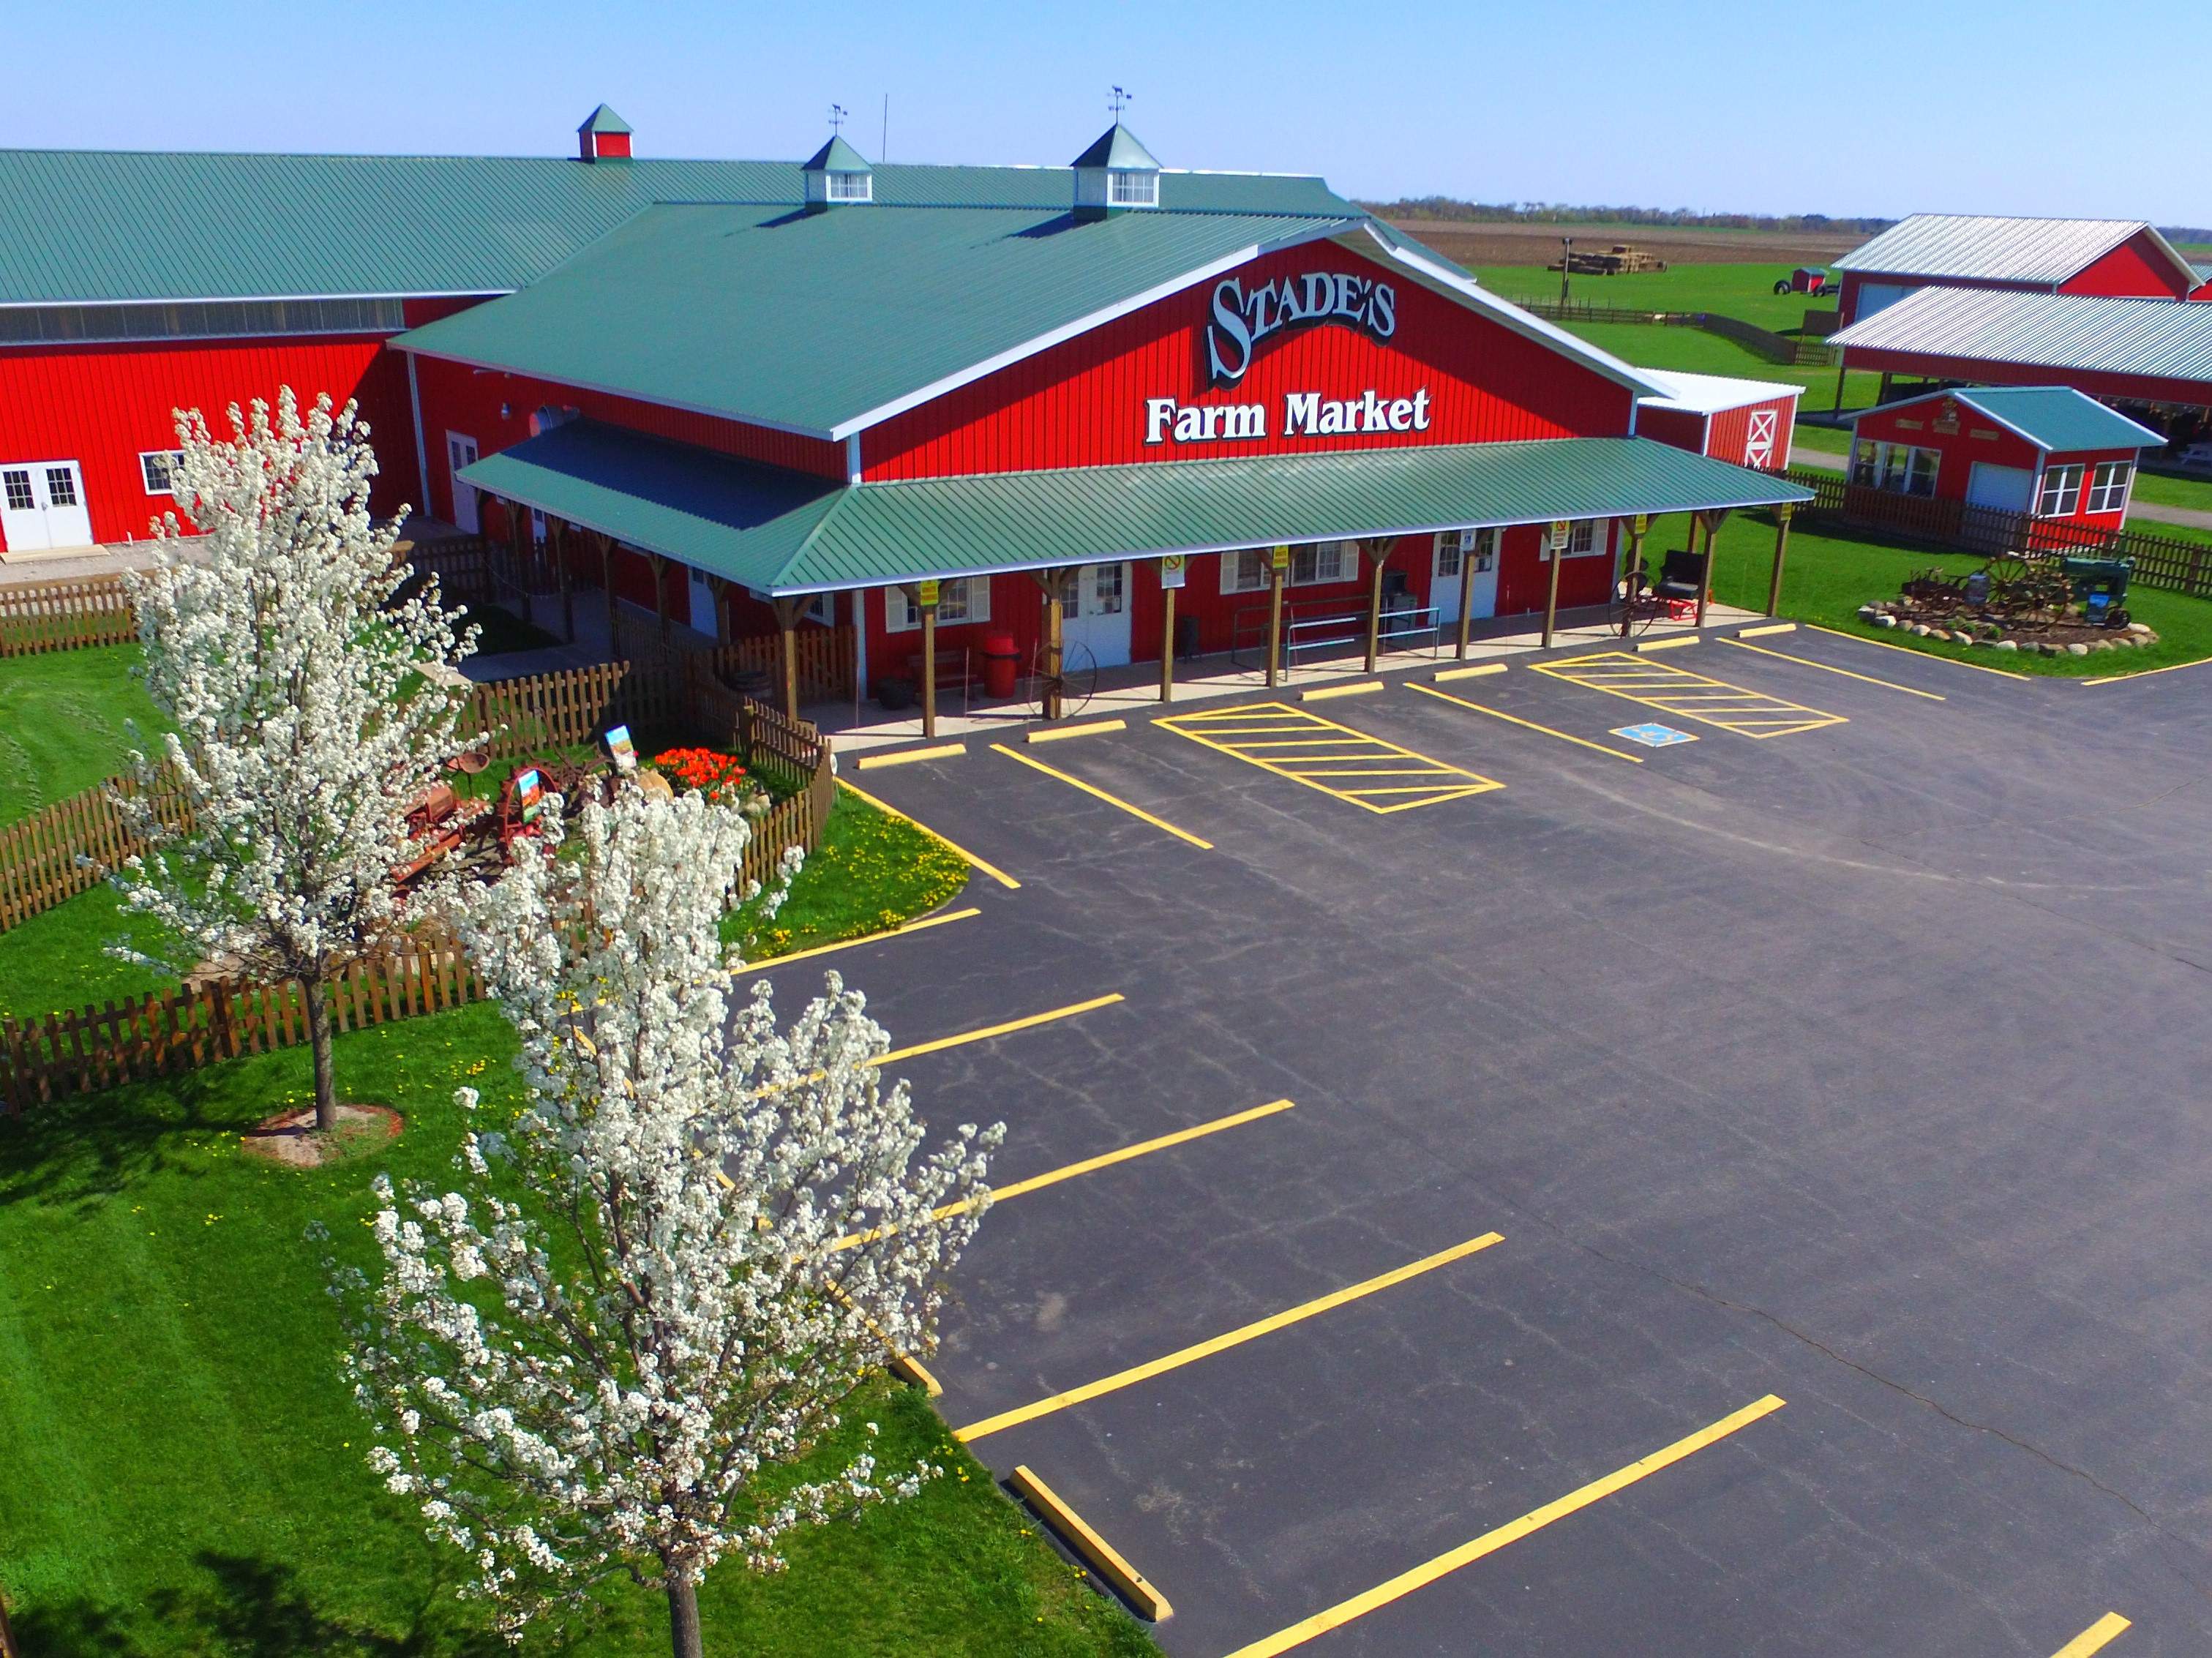 The exterior of the red barn-like Stade's Farm and Market in McHenry